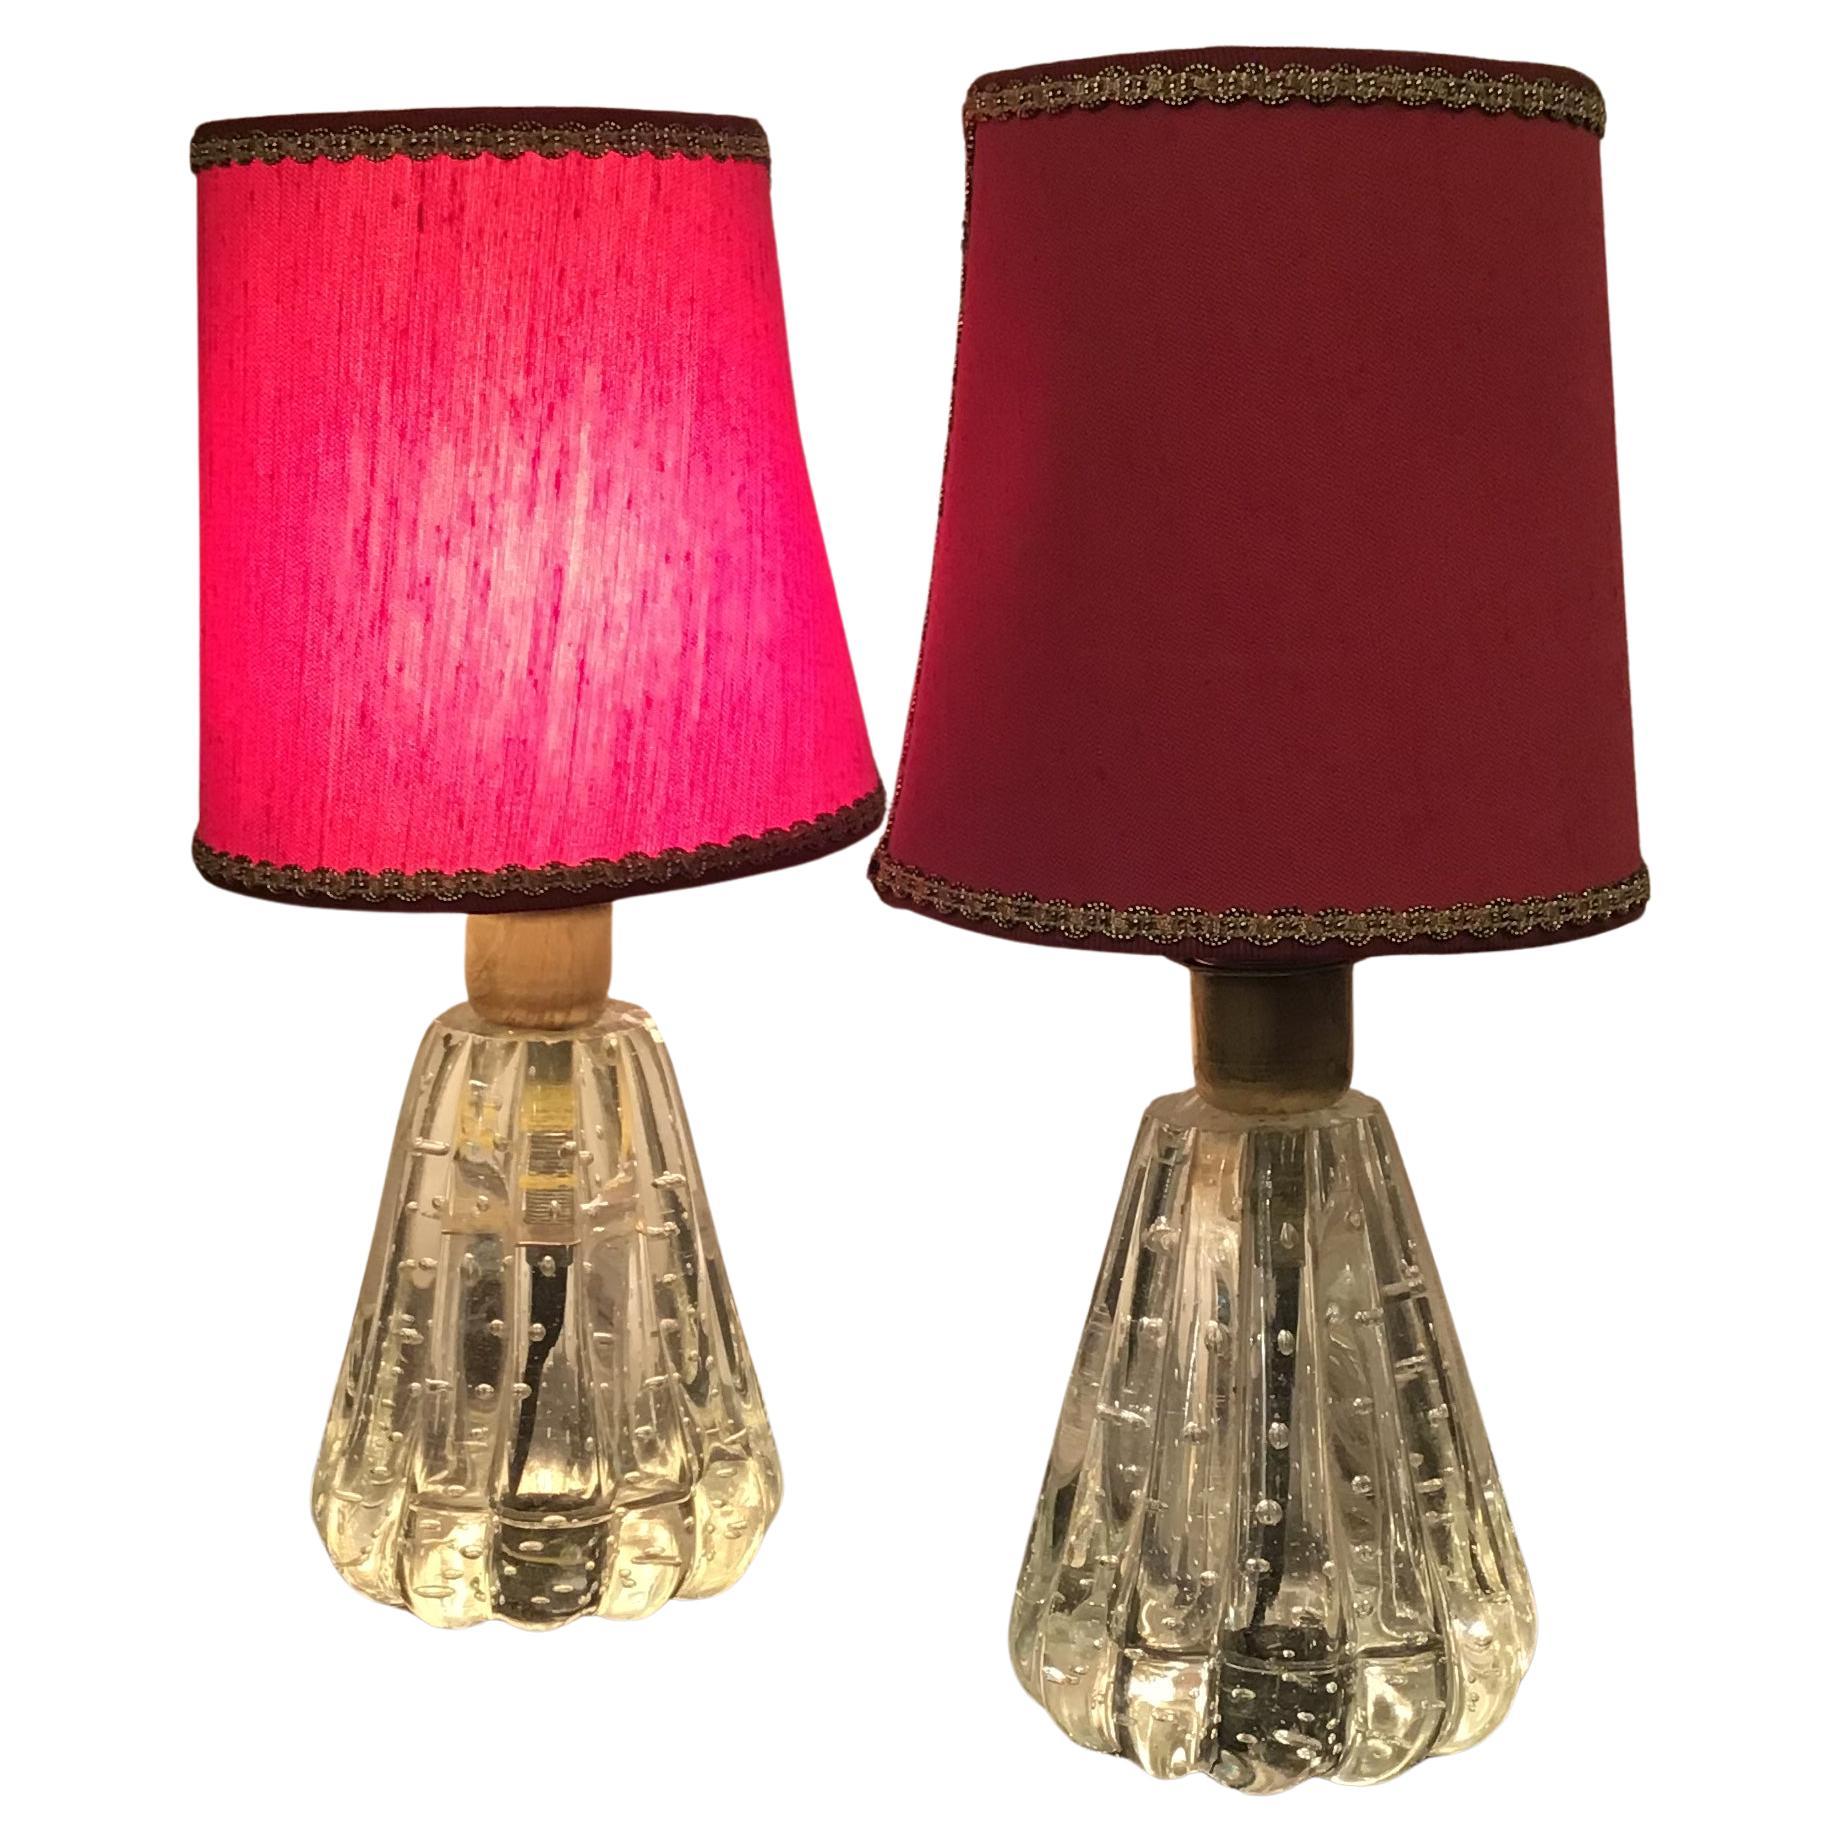 Barovier e Toso Table Lamps Murano Glass Brass Fabric Lampshade 1940 Italy For Sale